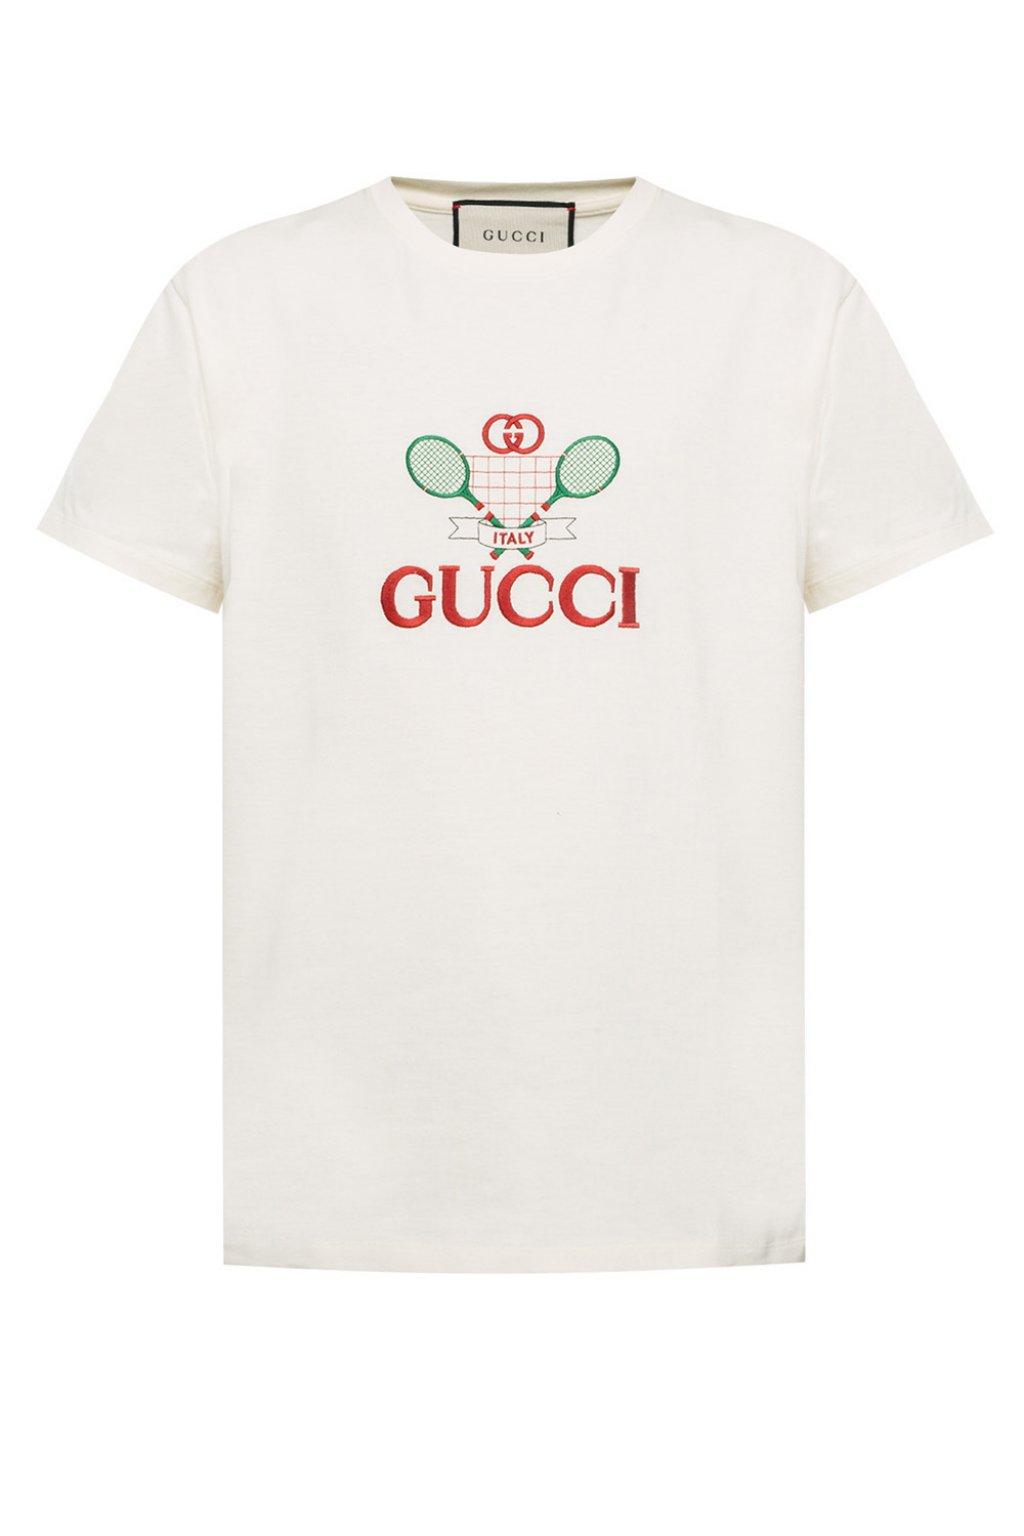 Gucci Cotton Tennis Embroidered T Shirt for Men - Lyst